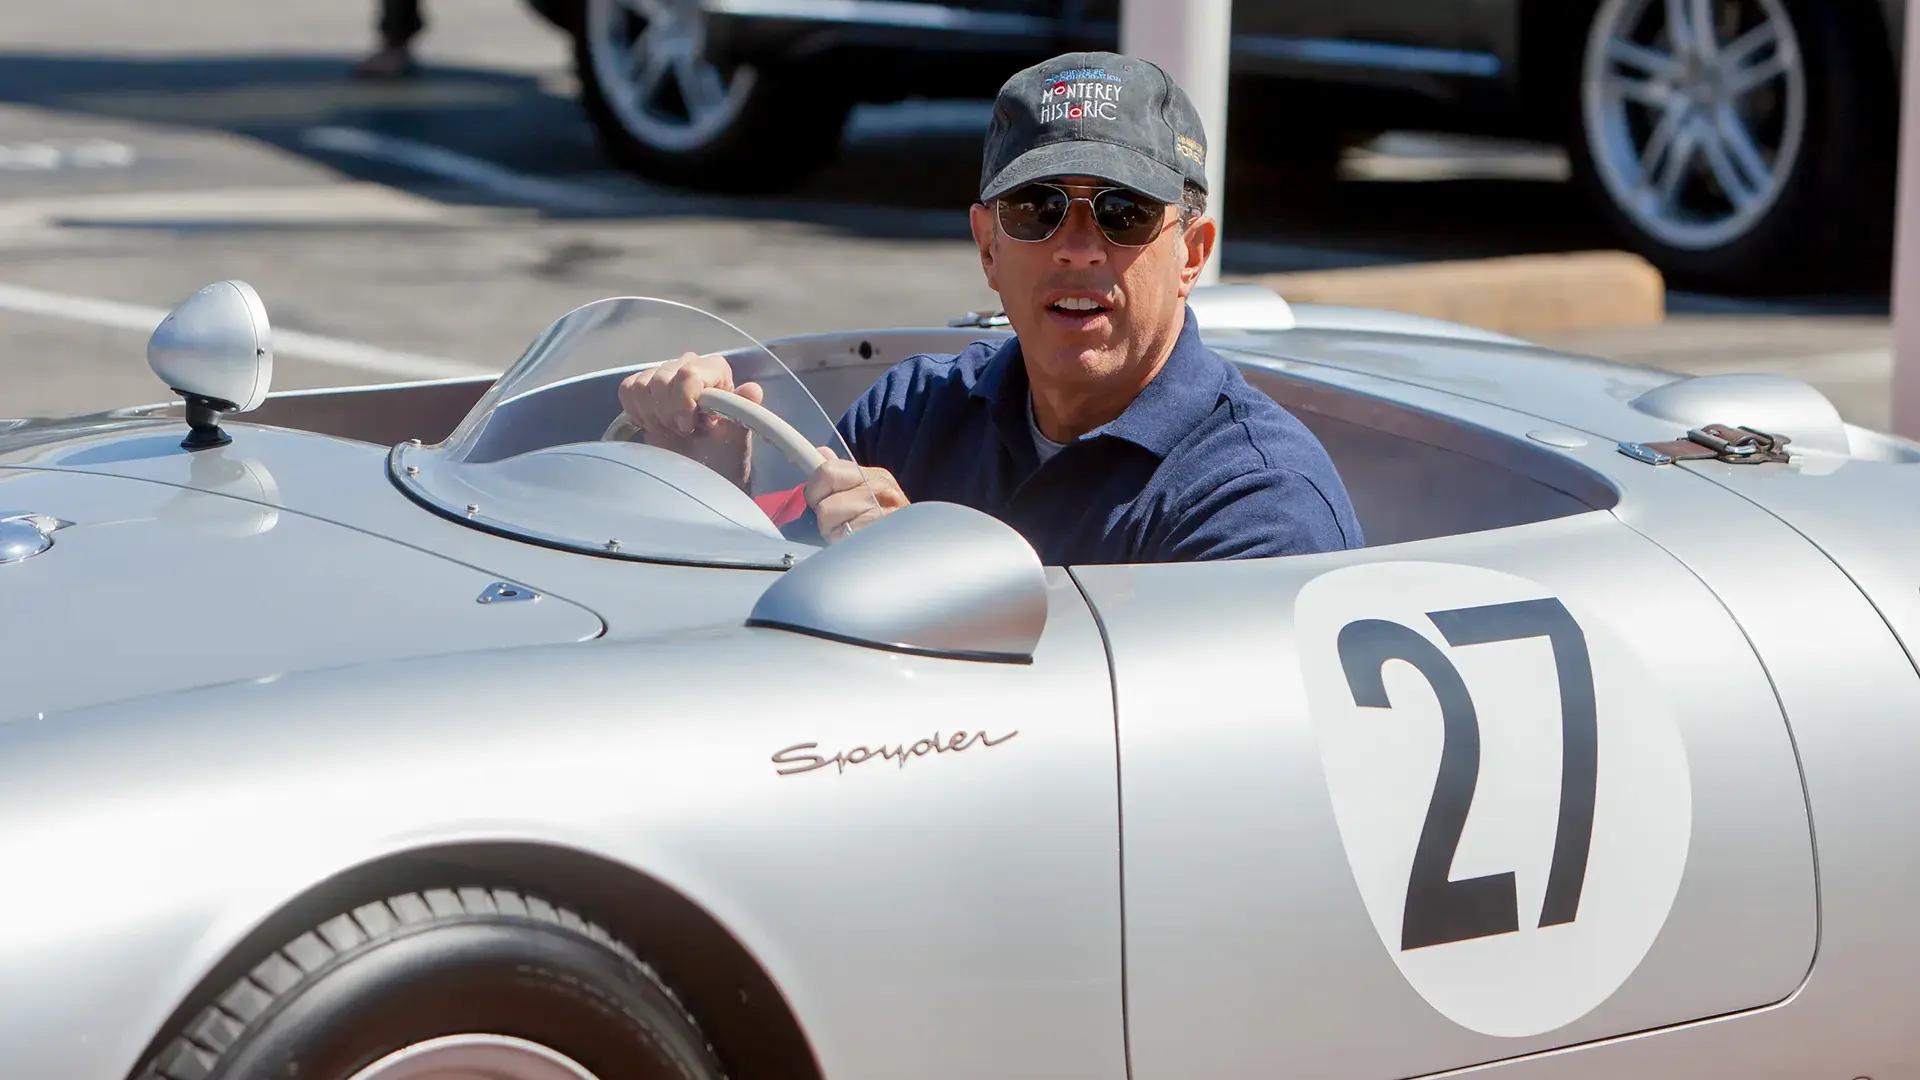 Business F1 Top 20 Petrolheads: Jerry Seinfeld, A Desire For Comedy And Cars image